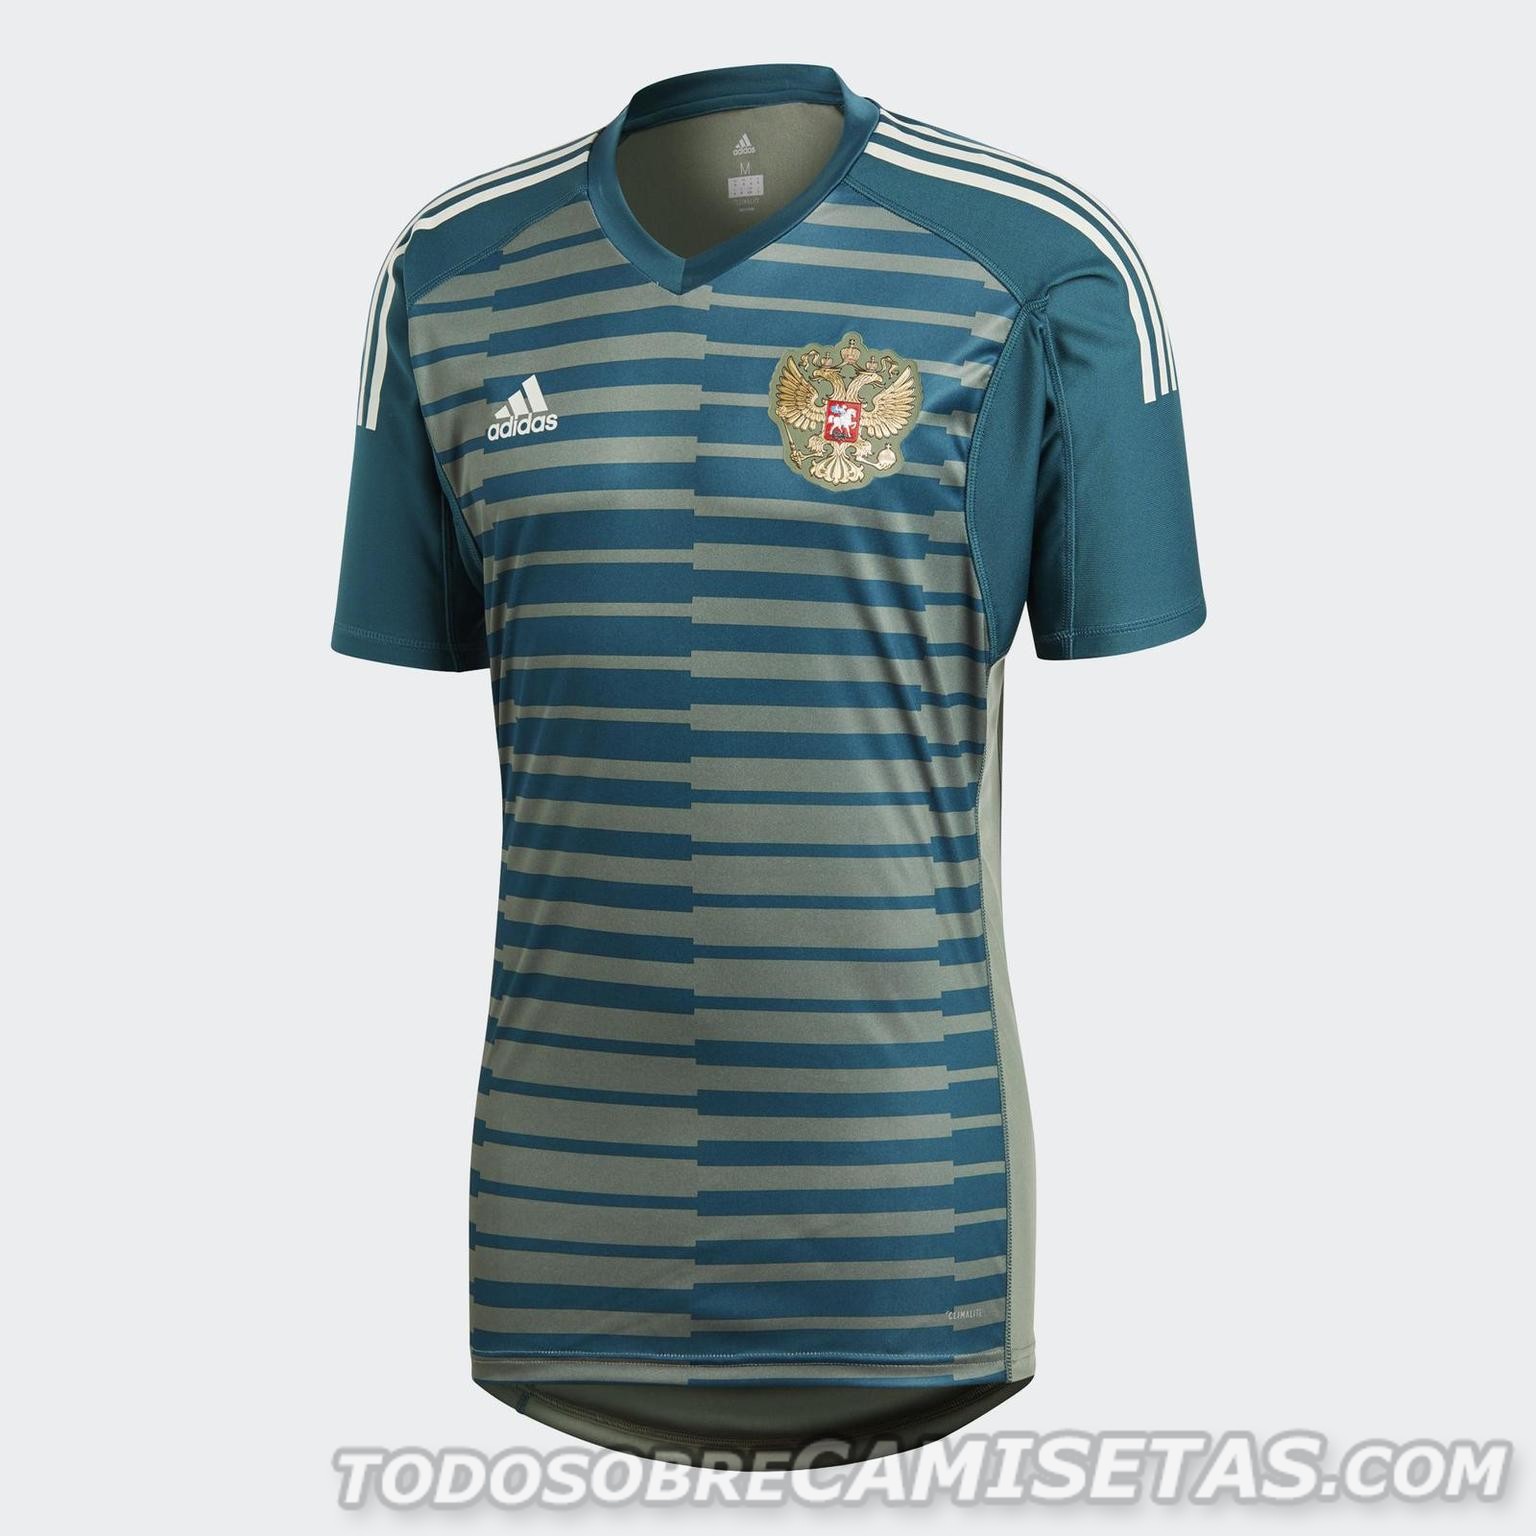 Russia 2018 World Cup adidas Kit